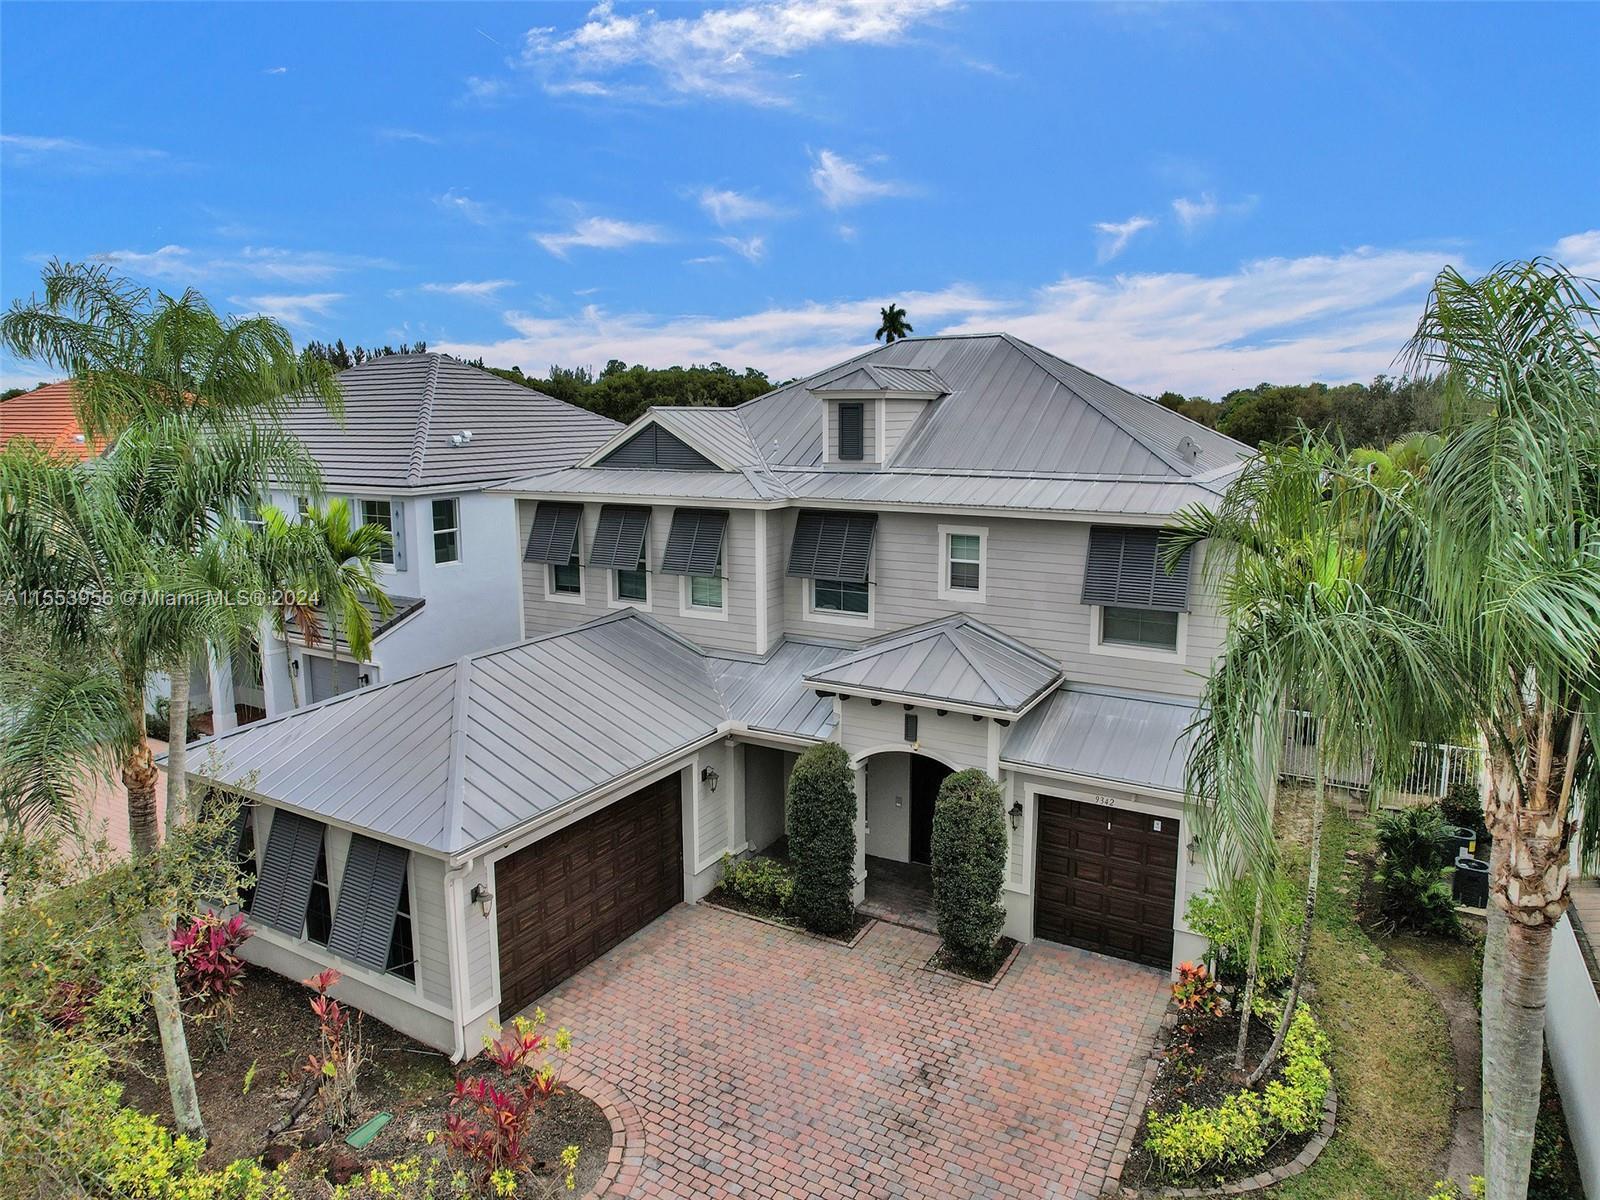 Photo of 9342 Madewood Ct in West Palm Beach, FL